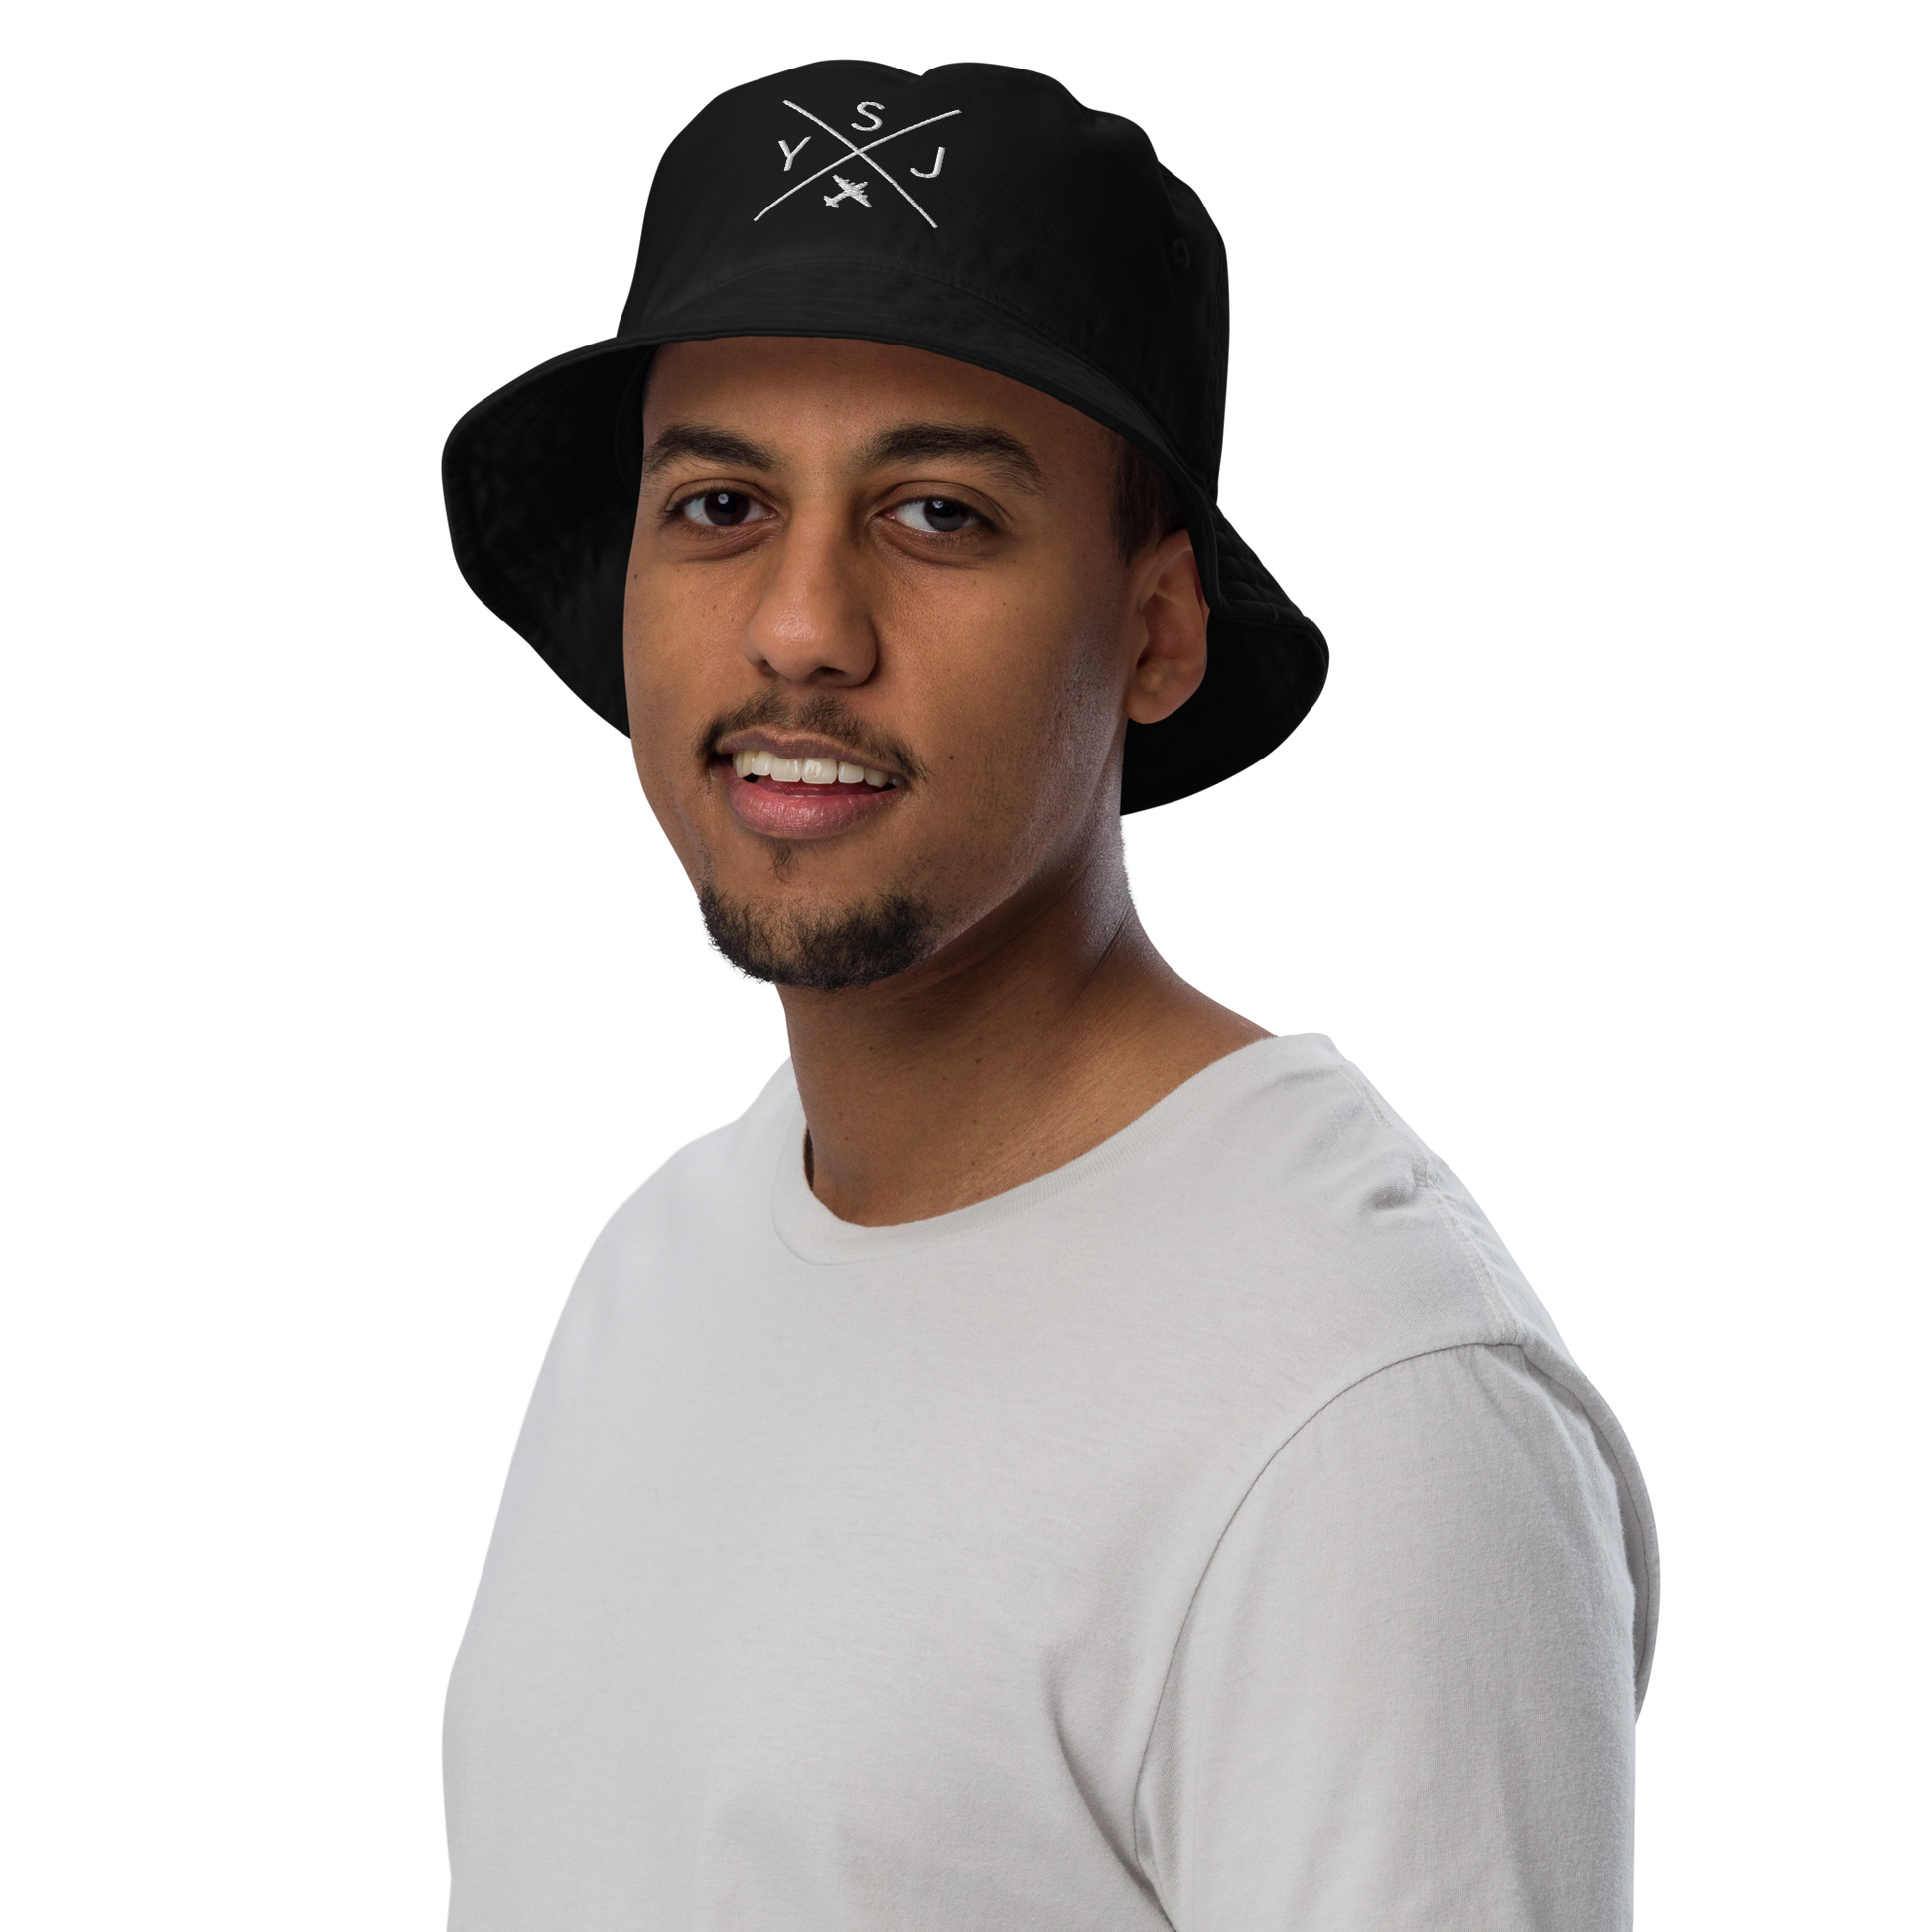 YHM Designs - YSJ Saint John Organic Cotton Bucket Hat - Crossed-X Design with Airport Code and Vintage Propliner - White Embroidery - Image 05